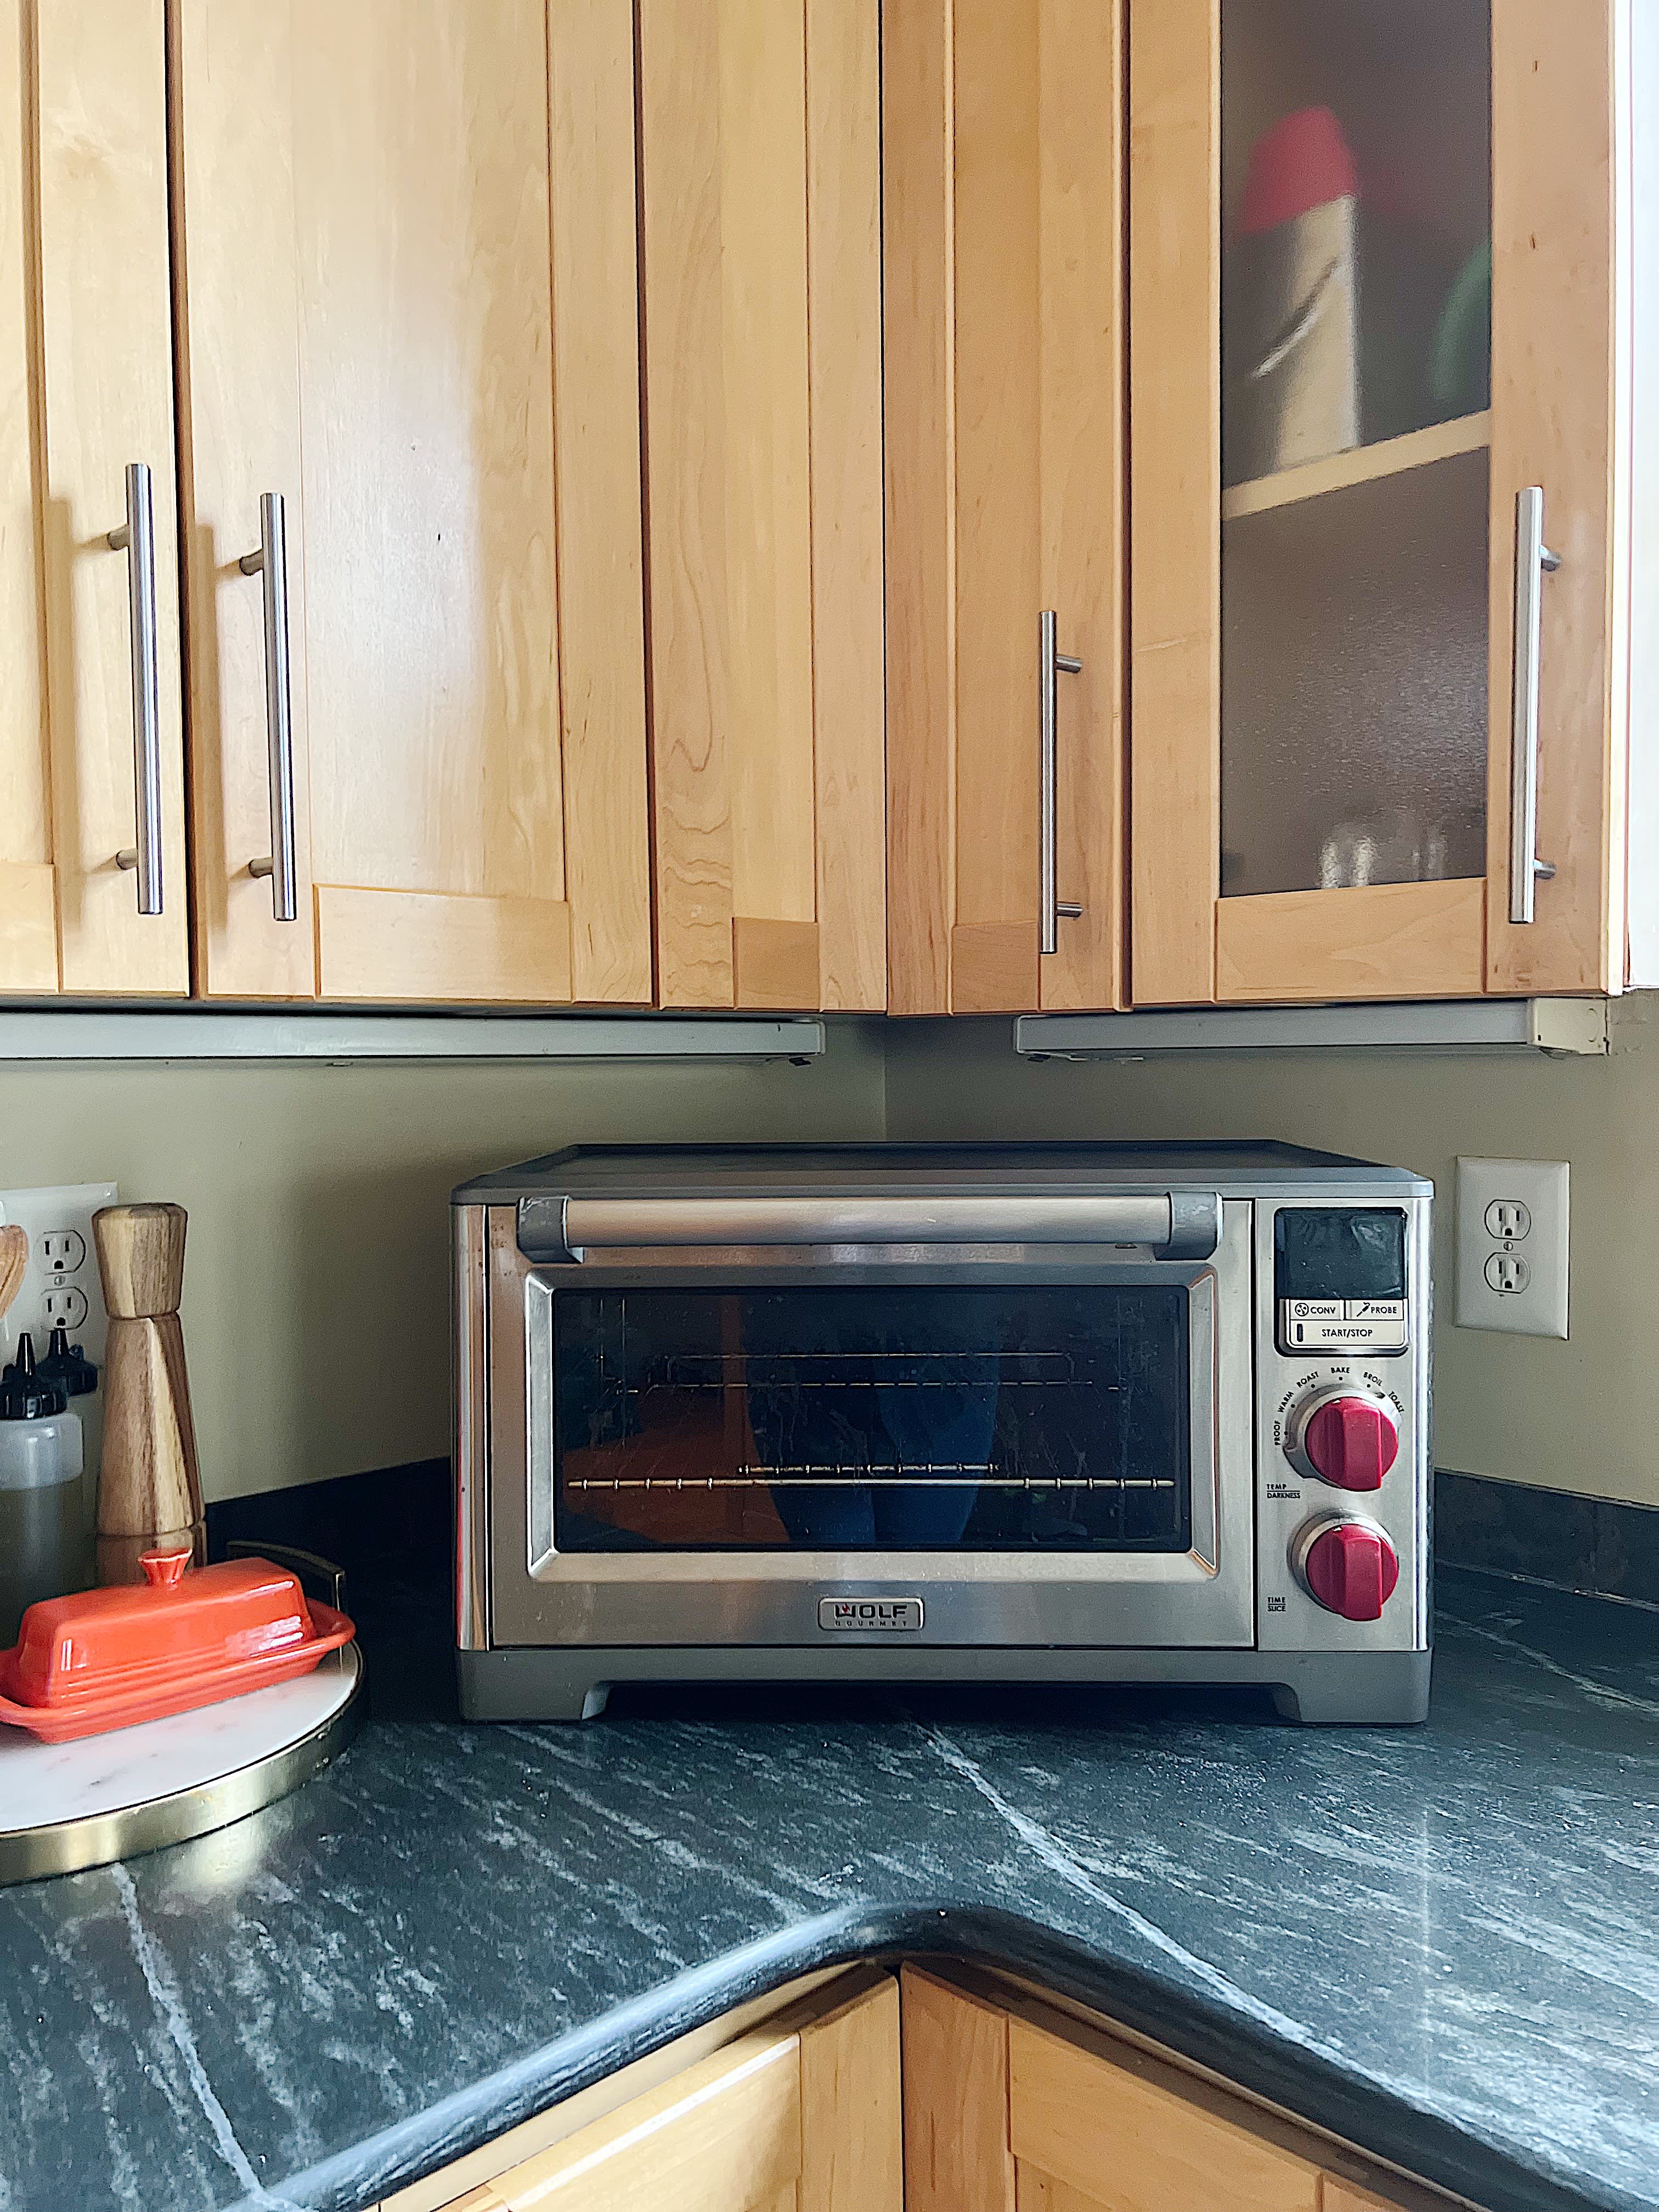 Wolf Gourmet Countertop Oven with Red Knobs + Reviews